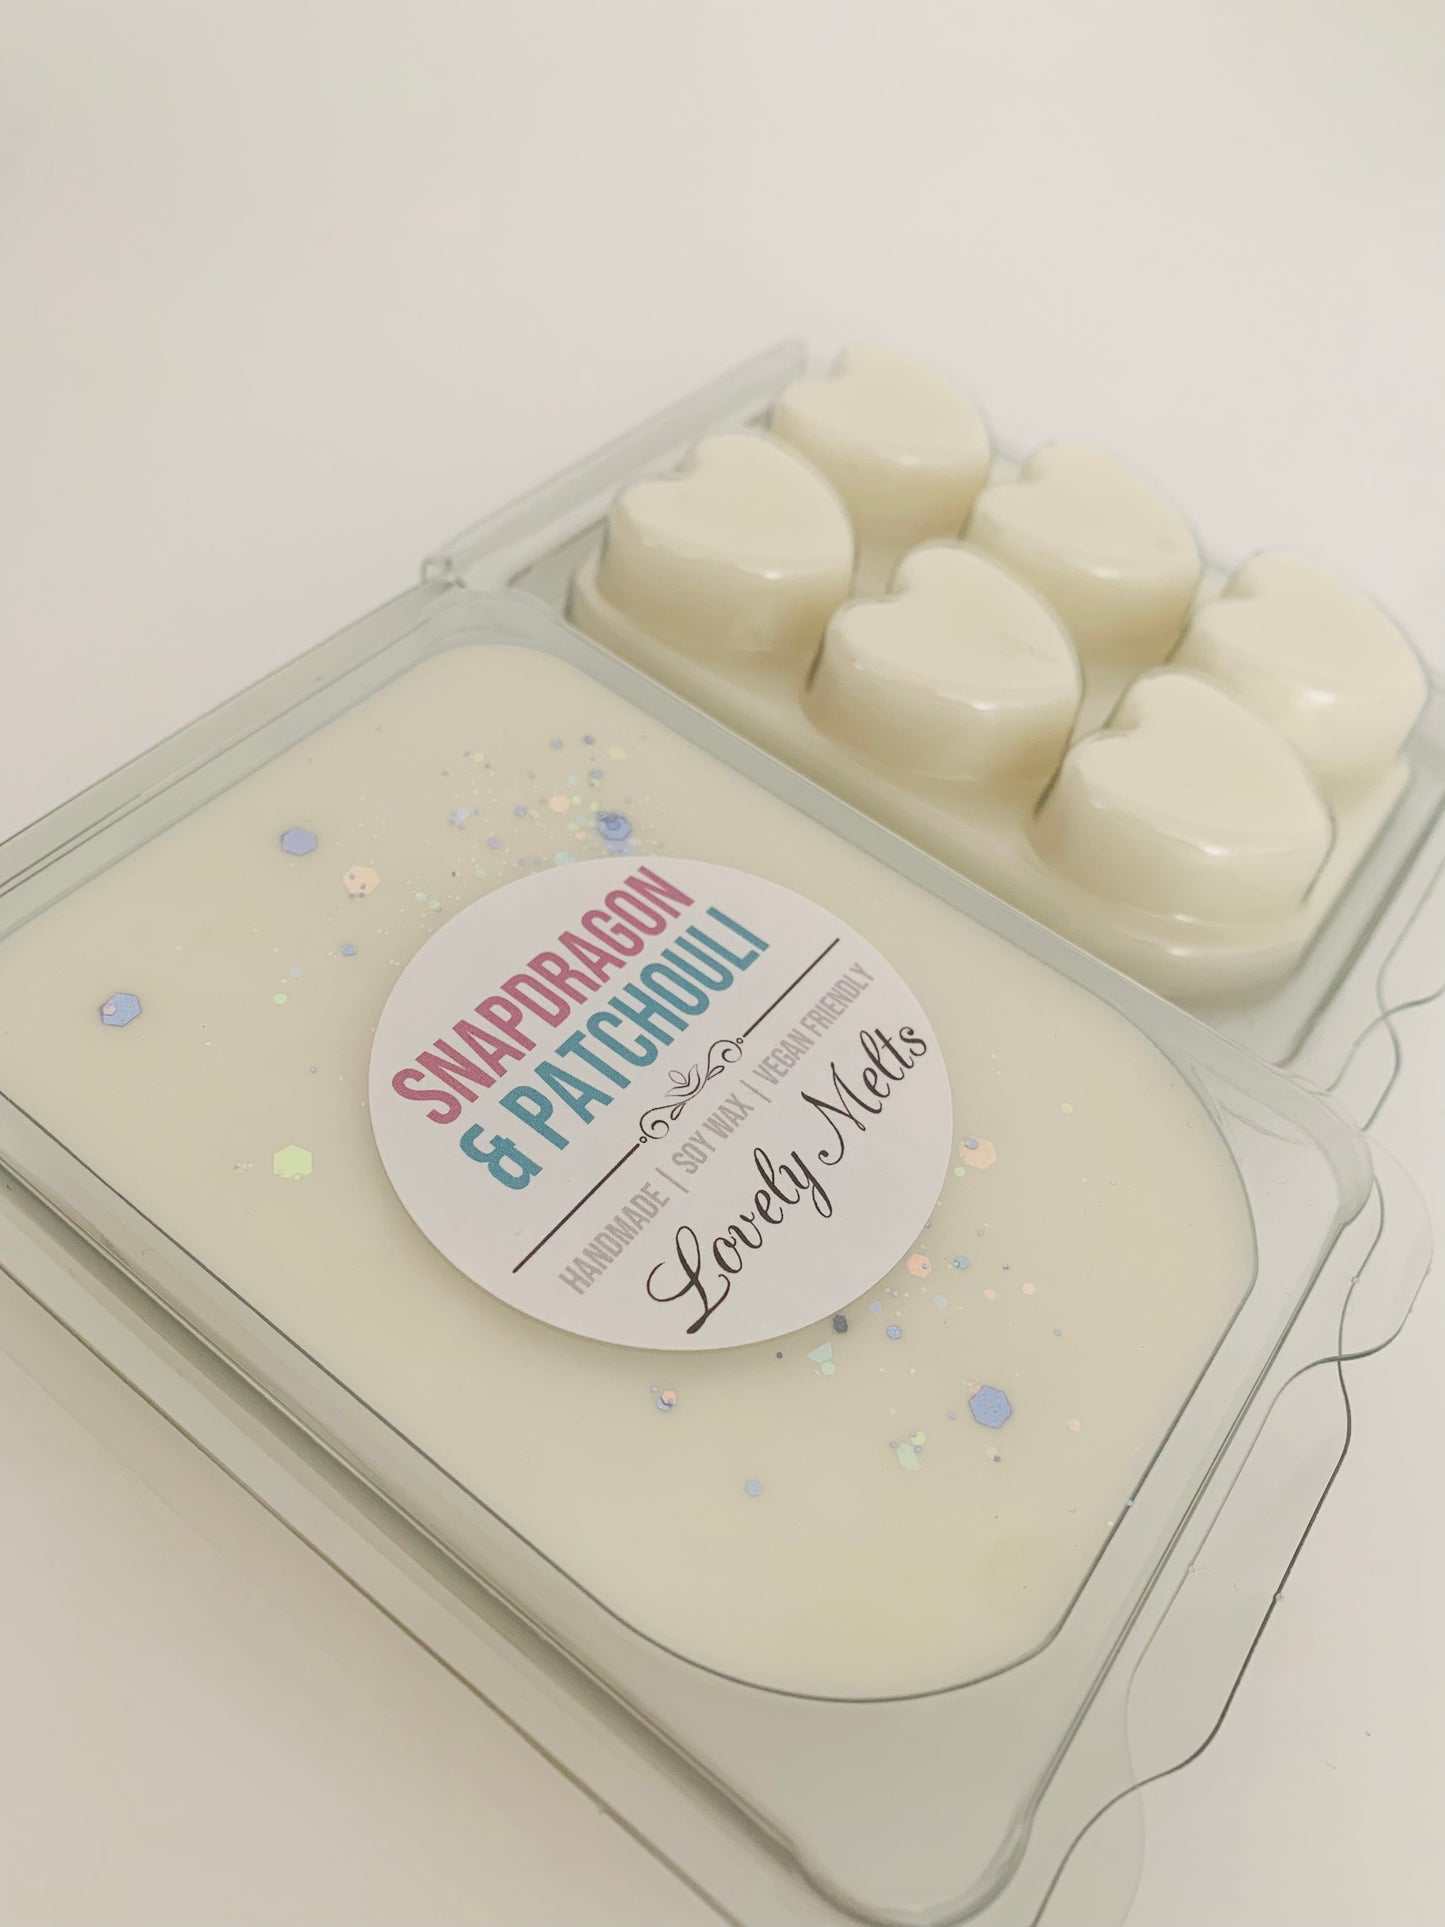 snapdragon and patchouli vegan wax melts